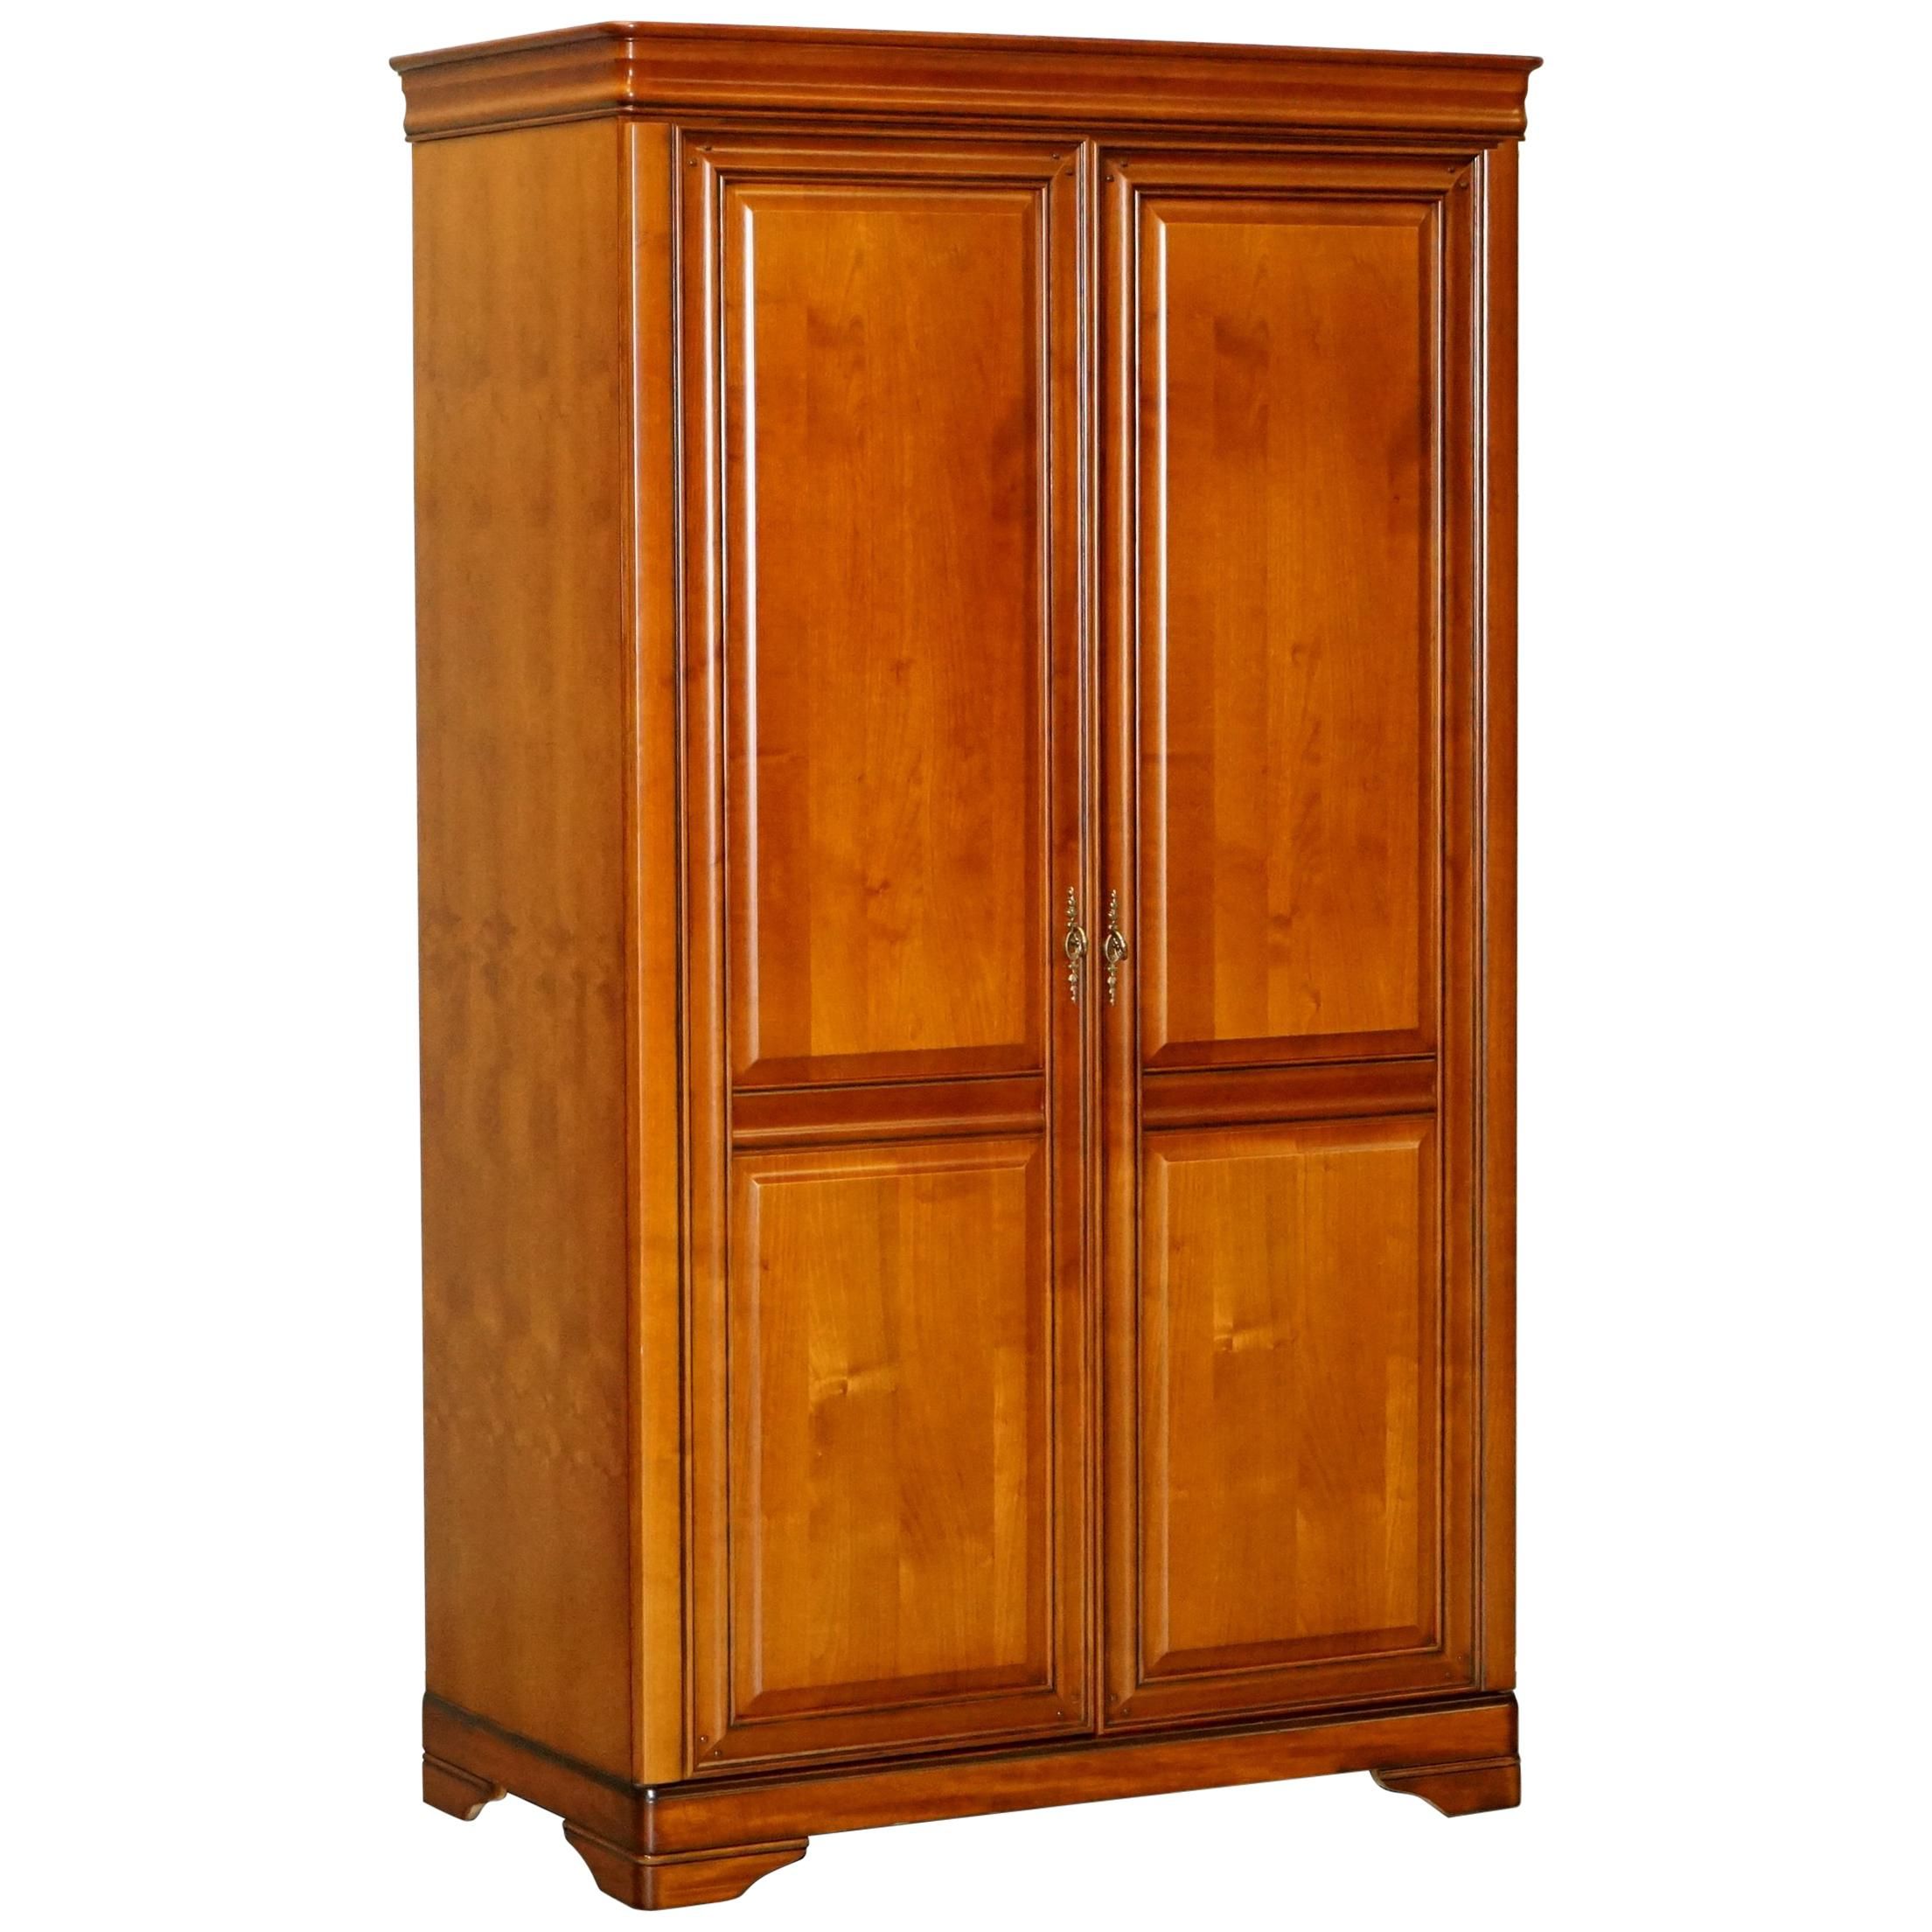 Stunning Solid Cherry Wood Double Bank Wardrobe Part Of A Large Suite Must  See At 1stdibs | Cherry Wood Wardrobes, Big Double Wardrobe, Cherry Wood  Closet Intended For Wardrobes In Cherry (View 11 of 15)